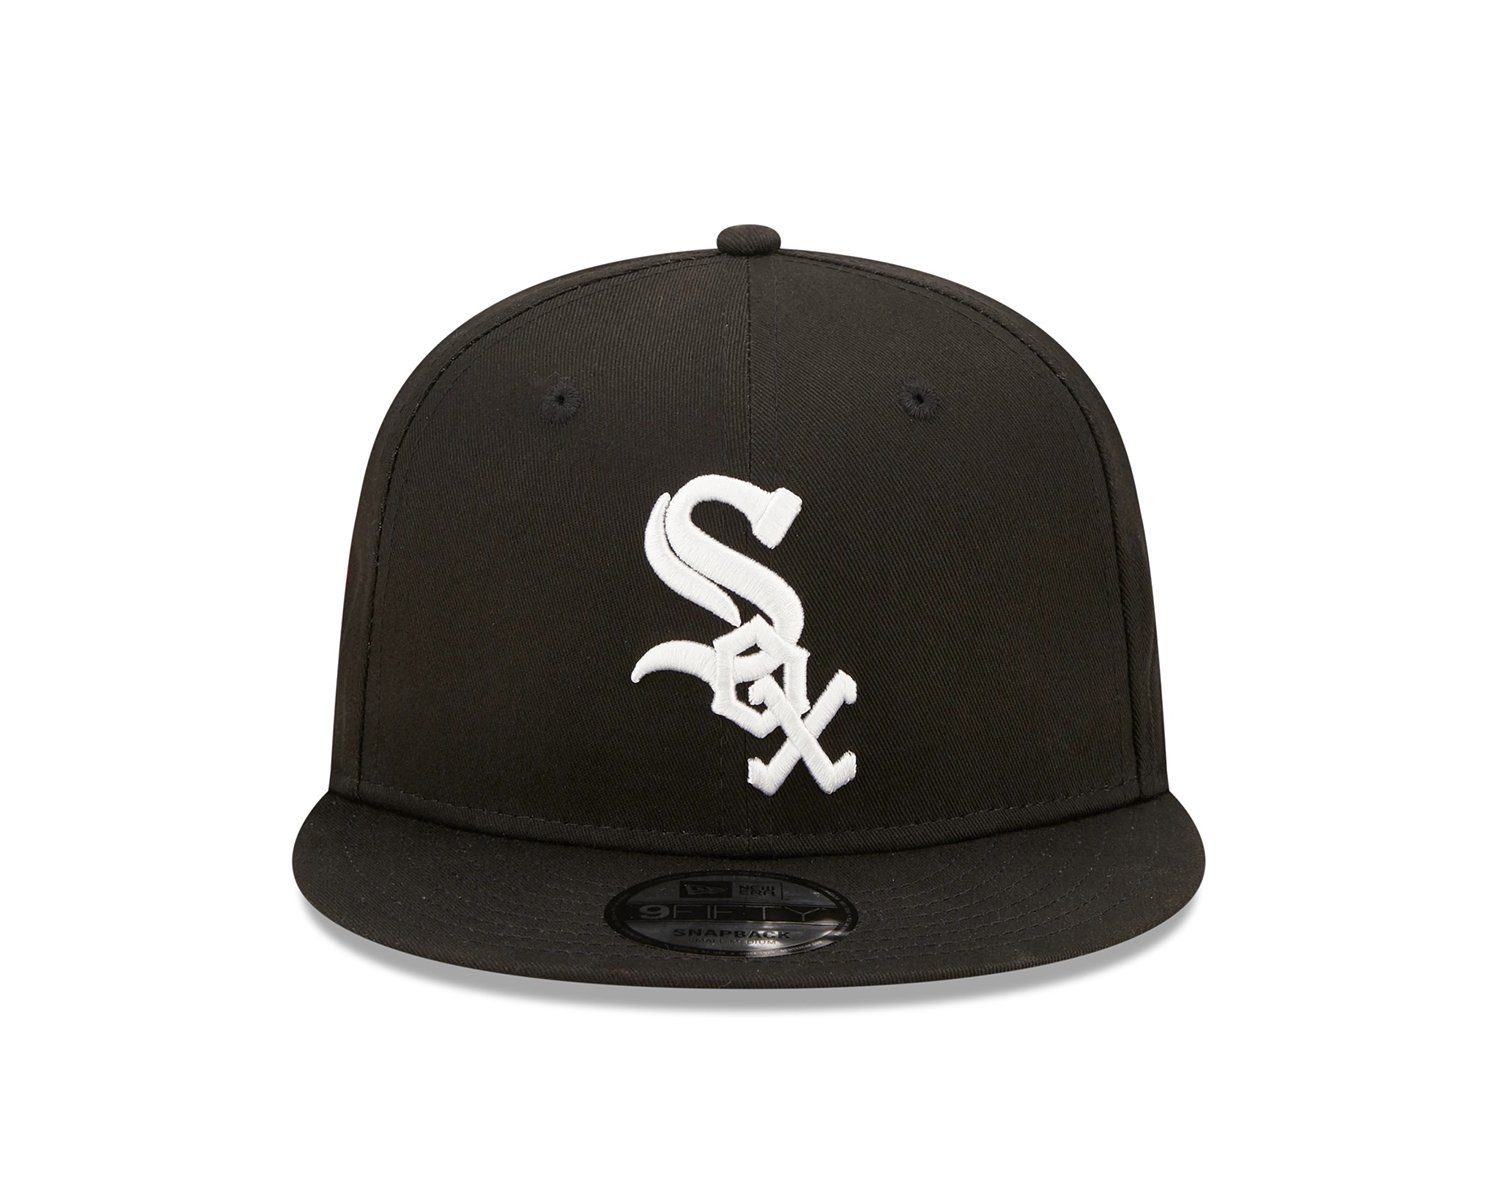 Sox Era White 9FIFTY Chicago New Cap Team Baseball Side Patch